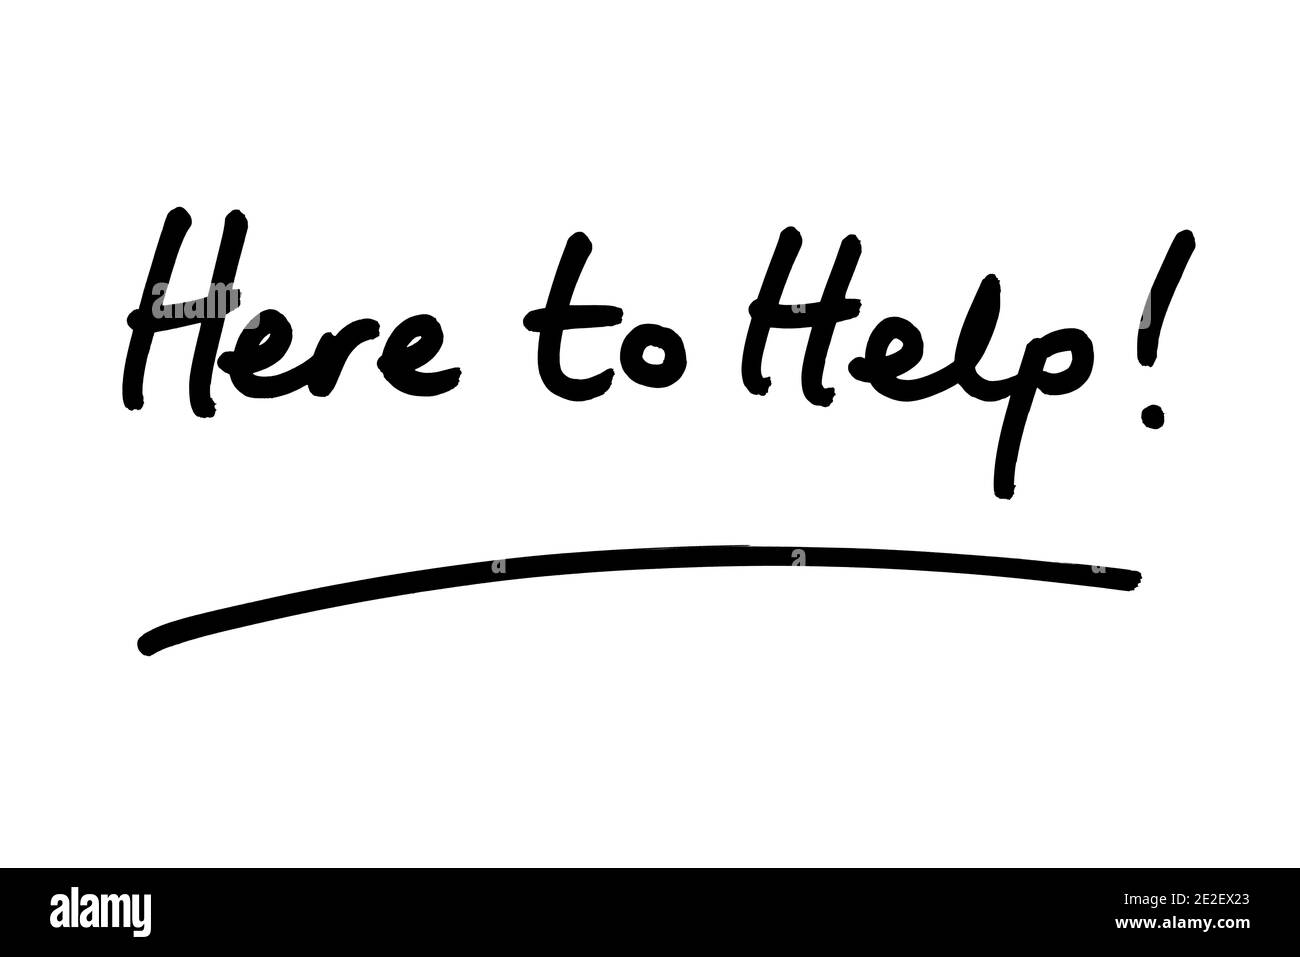 Here to Help! handwritten on a white background. Stock Photo